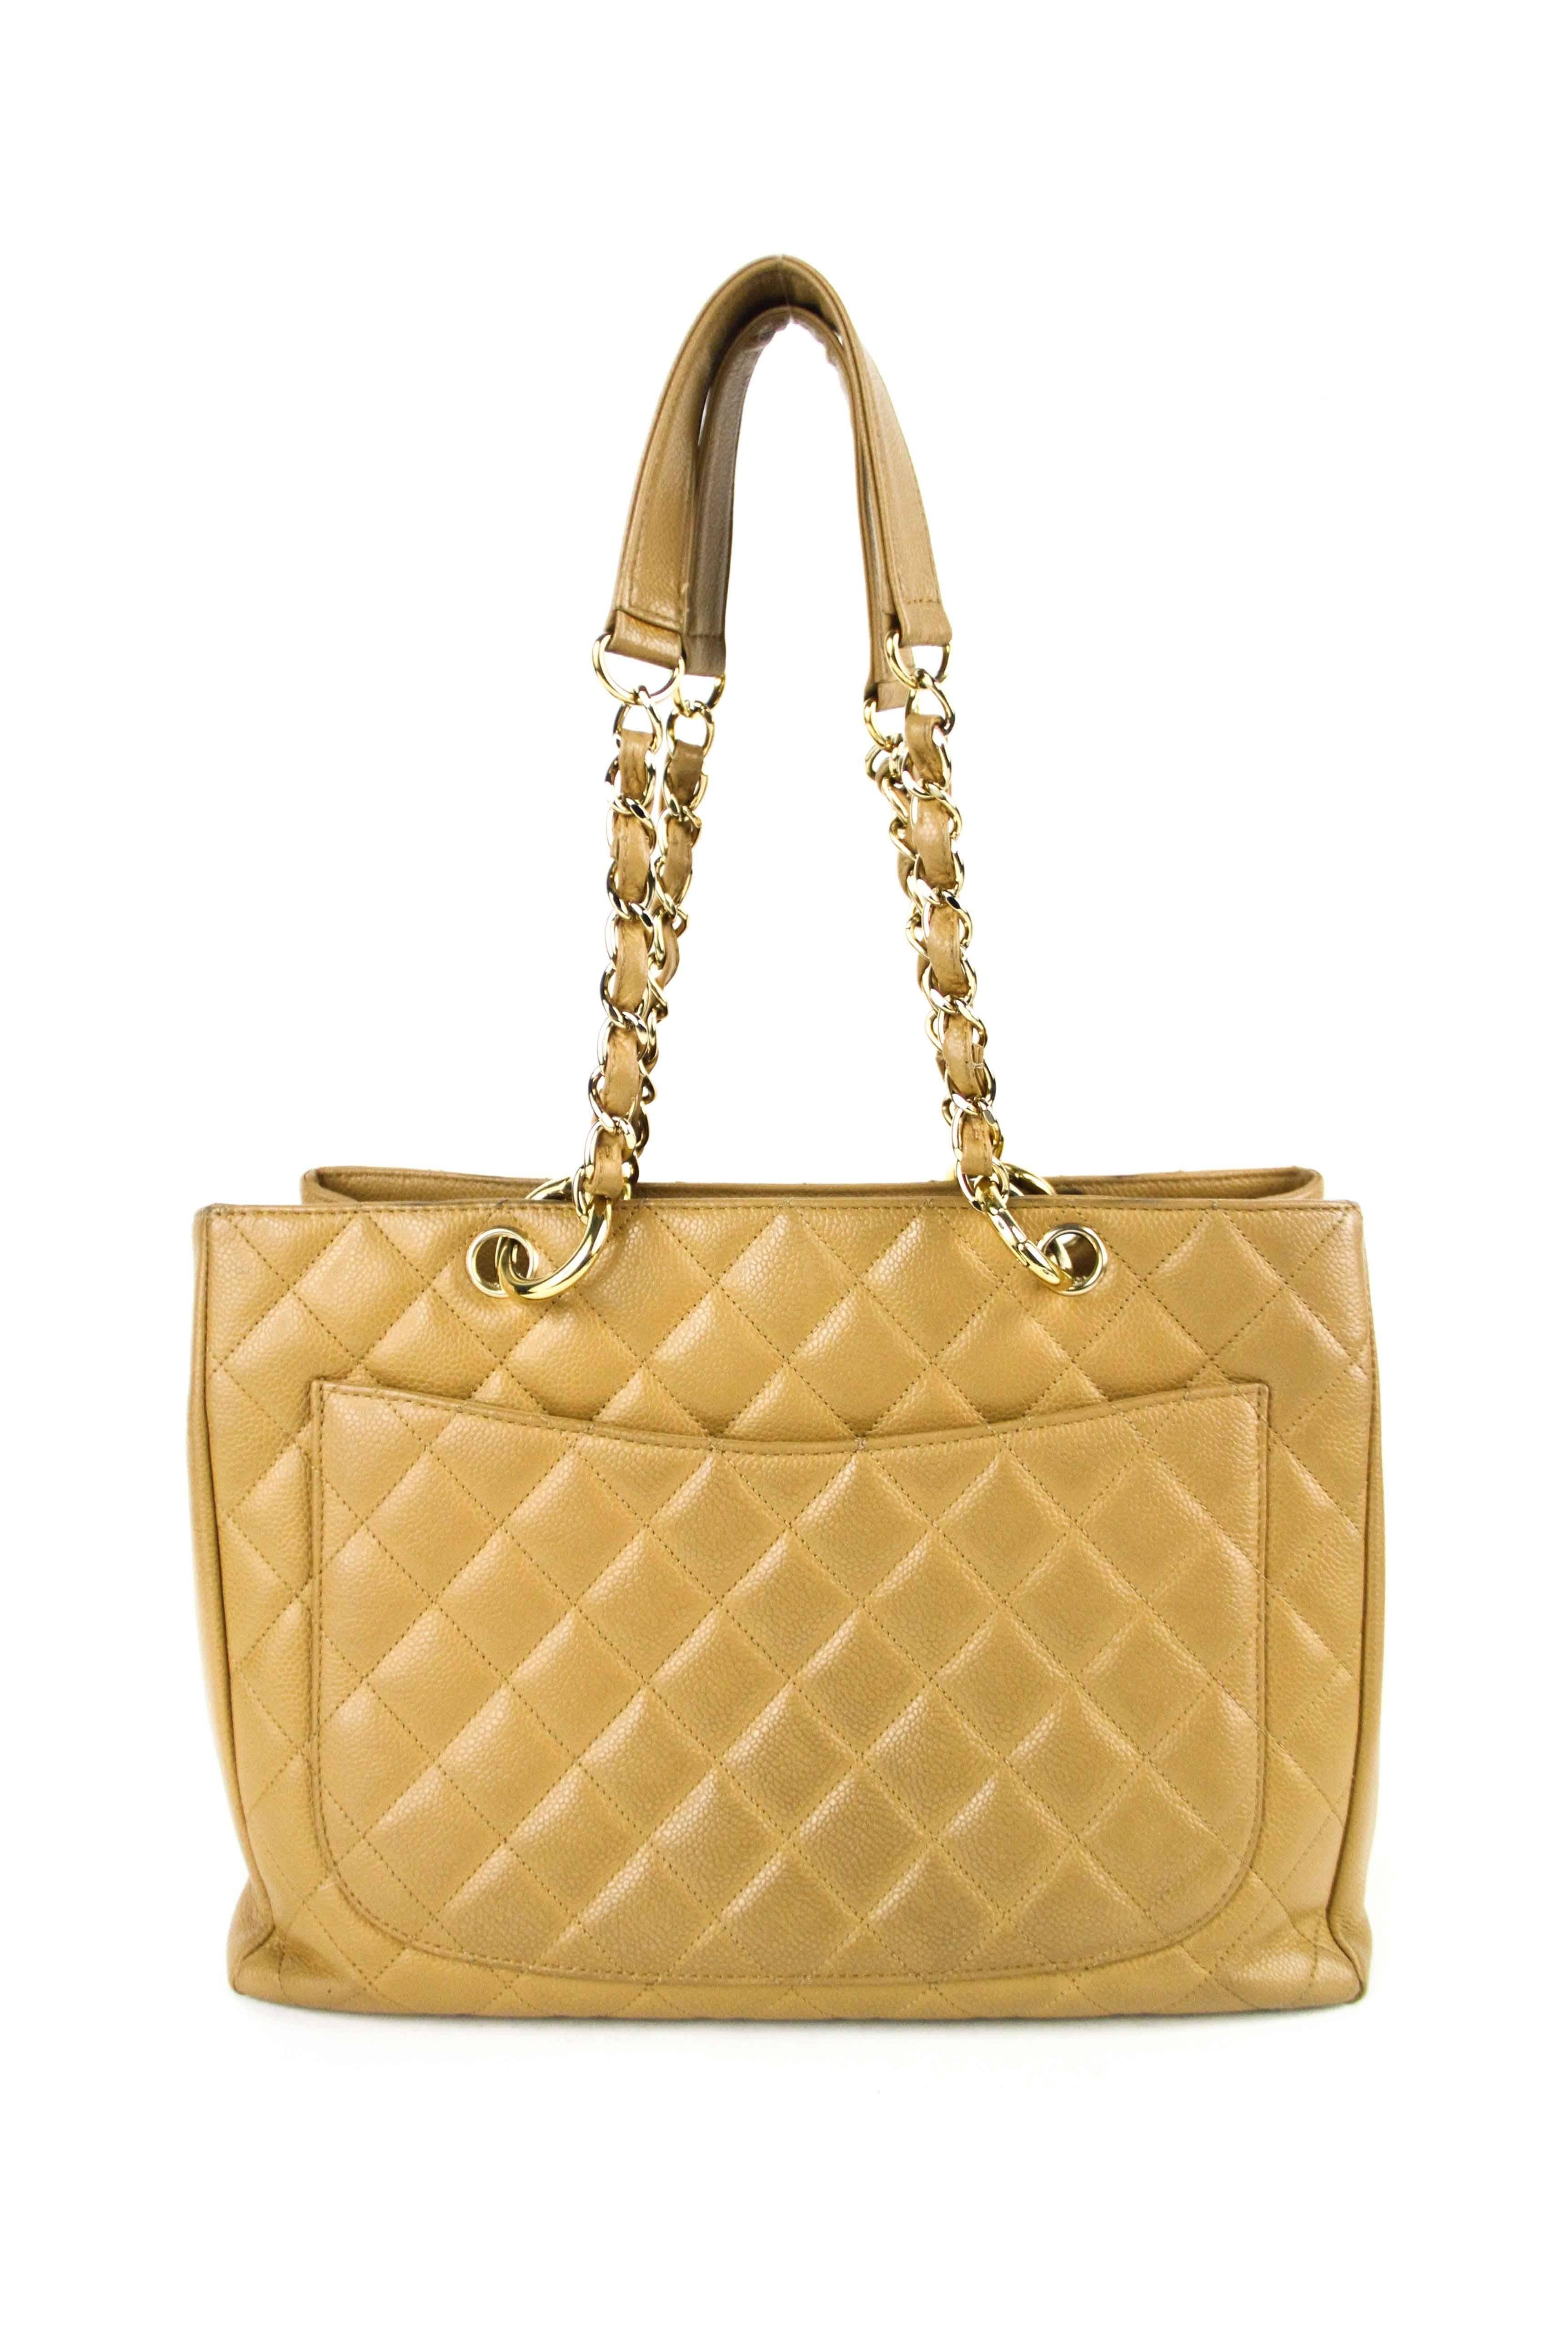 Authentic Chanel Caviar Quilted Grand Shopping Tote GST in Beige, Features large signature quilted Chanel CC logo on the front, wide flat pocket on the back. Classy beige leather threaded with gold chains straps with leather shoulder pads. Open top